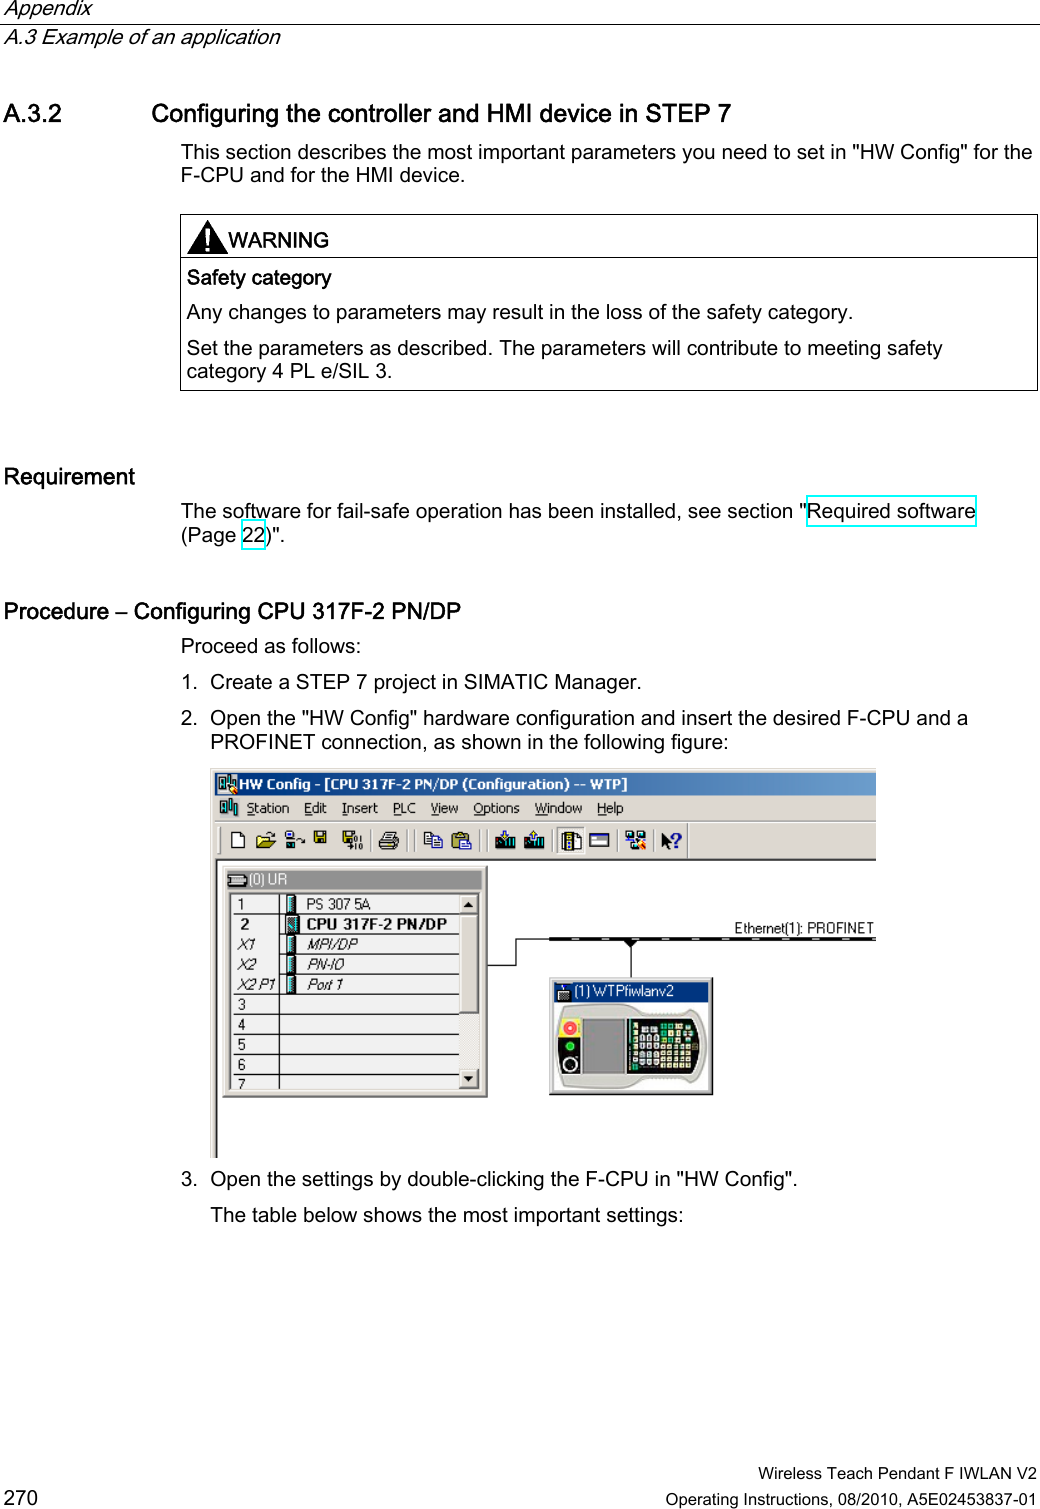 Appendix   A.3 Example of an application  Wireless Teach Pendant F IWLAN V2 270 Operating Instructions, 08/2010, A5E02453837-01 A.3.2 Configuring the controller and HMI device in STEP 7 This section describes the most important parameters you need to set in &quot;HW Config&quot; for the F-CPU and for the HMI device.  WARNING  Safety category Any changes to parameters may result in the loss of the safety category. Set the parameters as described. The parameters will contribute to meeting safety category 4 PL e/SIL 3.   Requirement  The software for fail-safe operation has been installed, see section &quot;Required software (Page 22)&quot;. Procedure – Configuring CPU 317F-2 PN/DP Proceed as follows: 1. Create a STEP 7 project in SIMATIC Manager. 2. Open the &quot;HW Config&quot; hardware configuration and insert the desired F-CPU and a PROFINET connection, as shown in the following figure:  3. Open the settings by double-clicking the F-CPU in &quot;HW Config&quot;. The table below shows the most important settings: PRELIMINARY II 1.7.2010